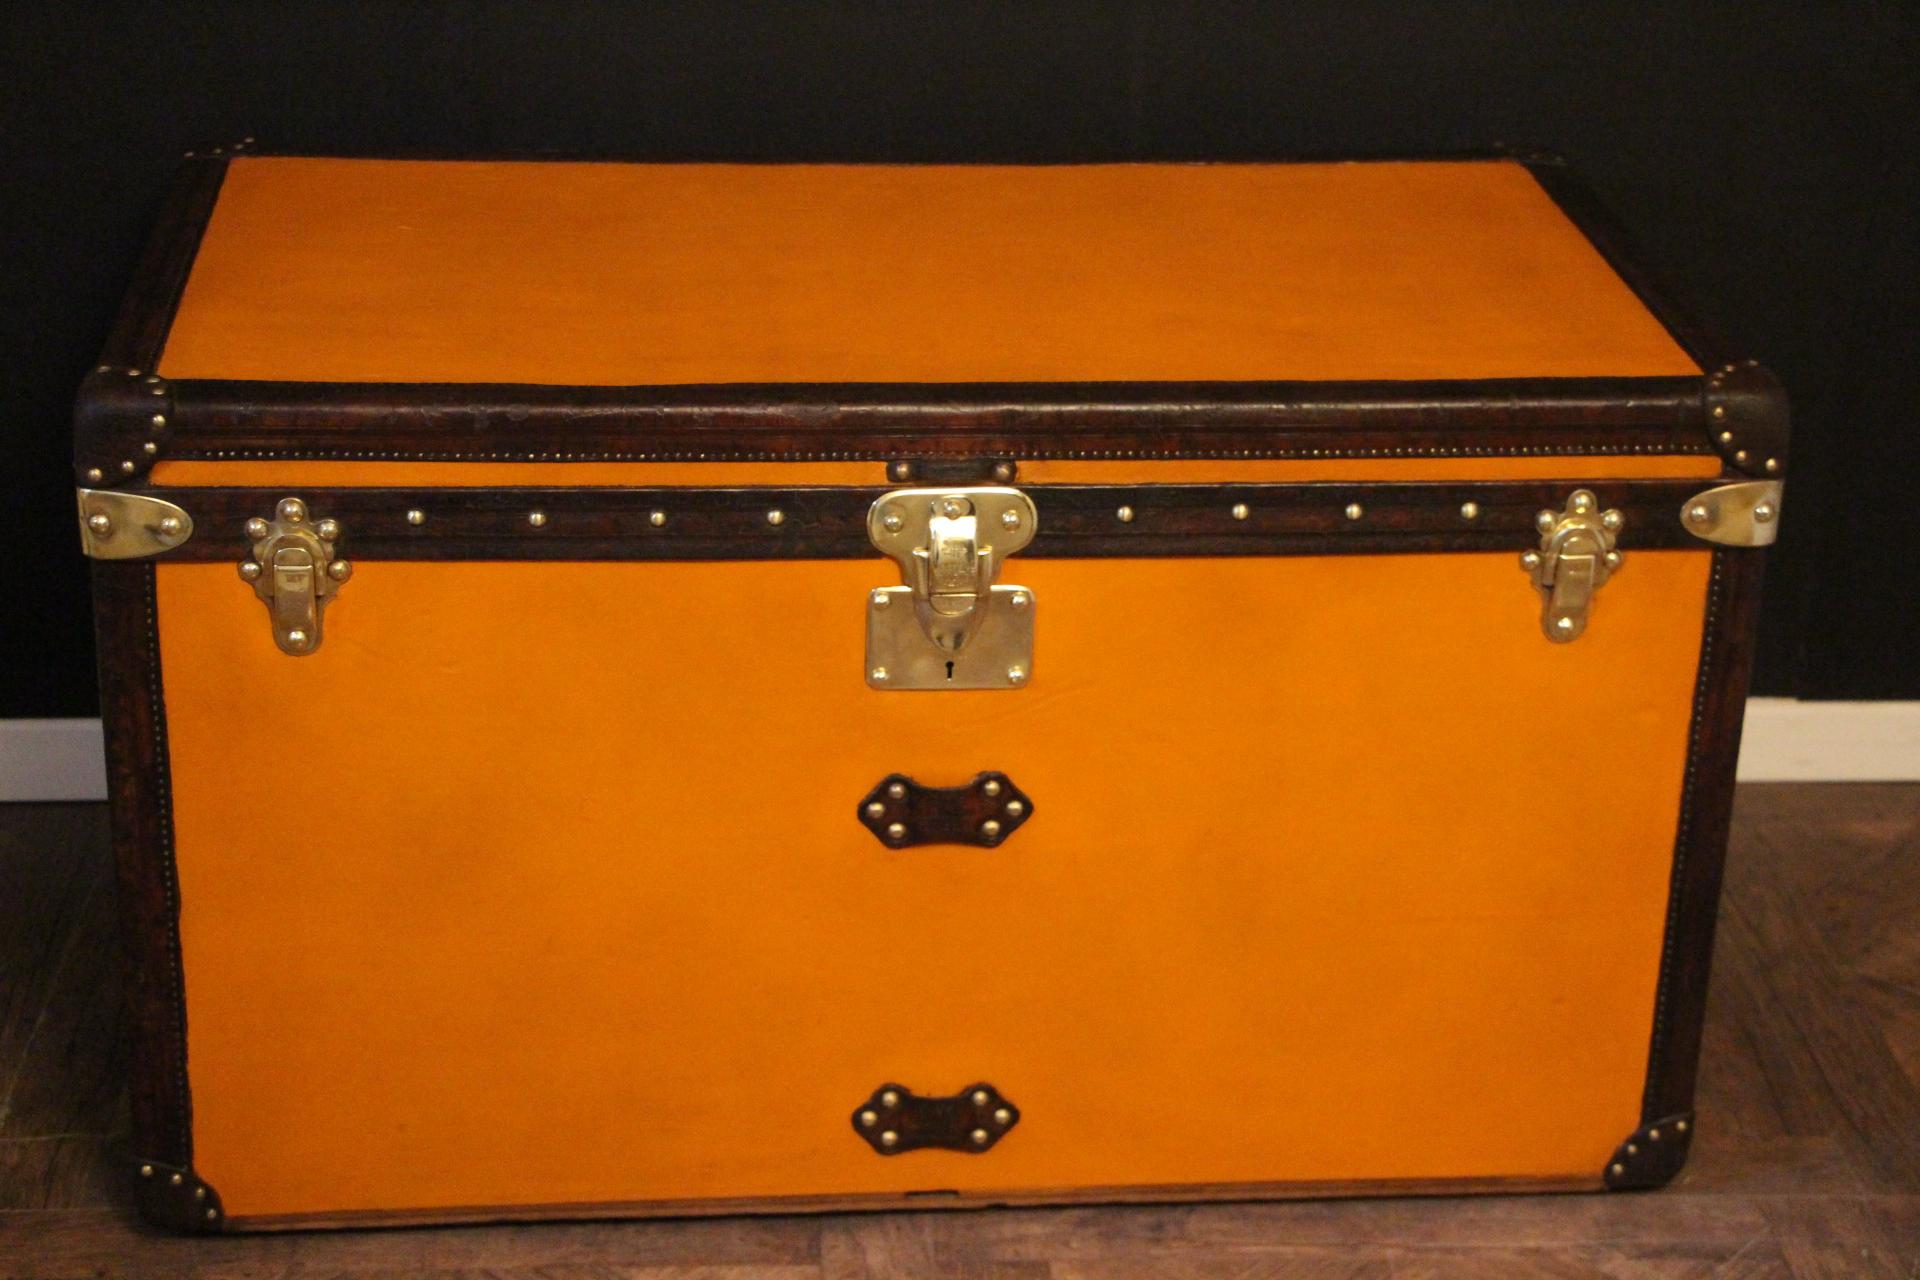 This unusual Louis Vuitton trunk features beautiful orange canvas, all leather trim in chocolate color, large LV embossed leather side handles, as well as all Louis Vuitton stamped brass studs. Dark blue and white customized painted stripes are on